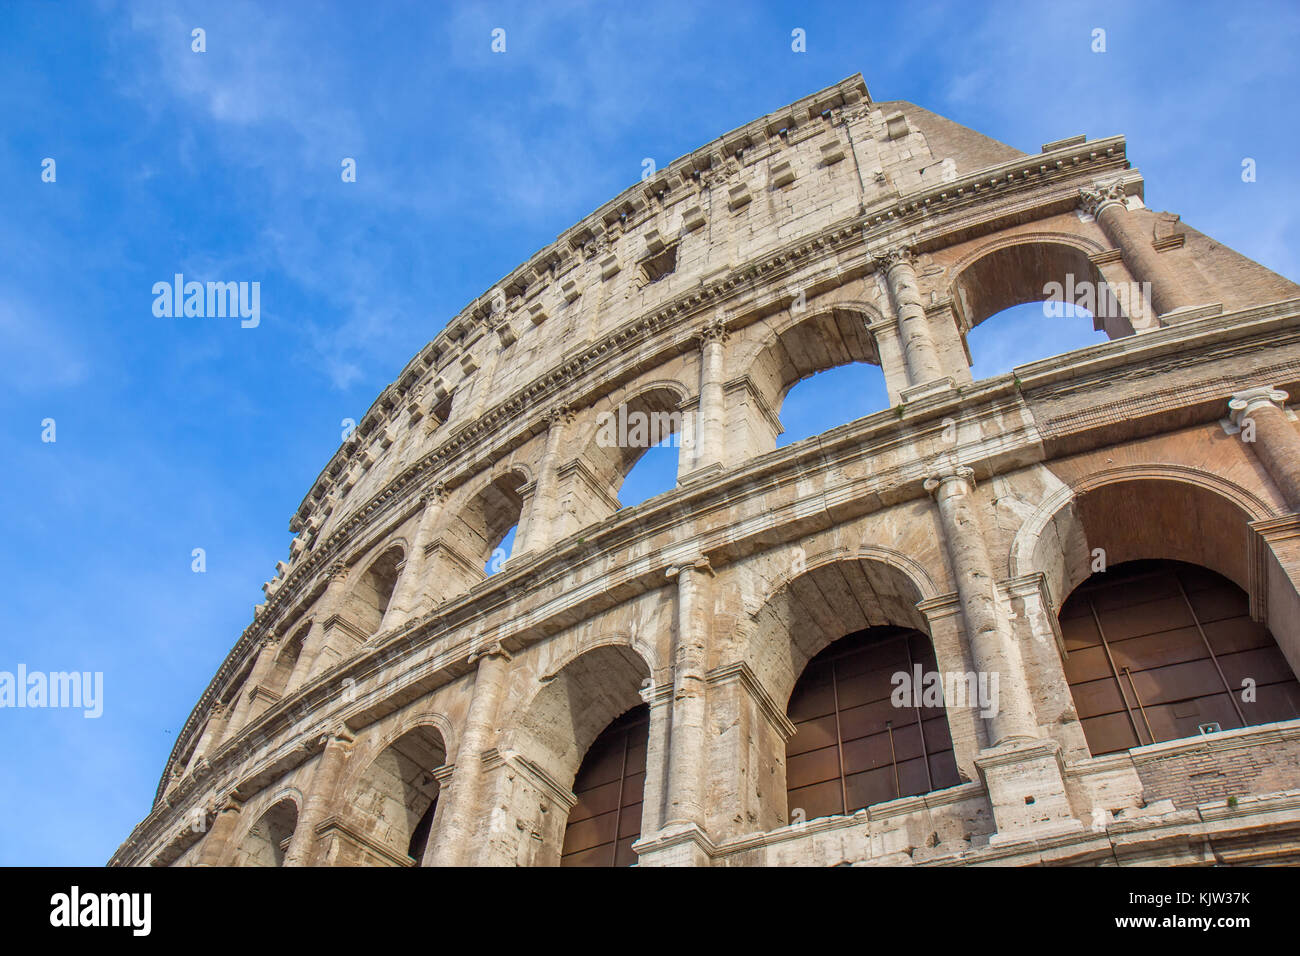 Part of the Roman Colosseum amphiteater in Rome, Italy Stock Photo